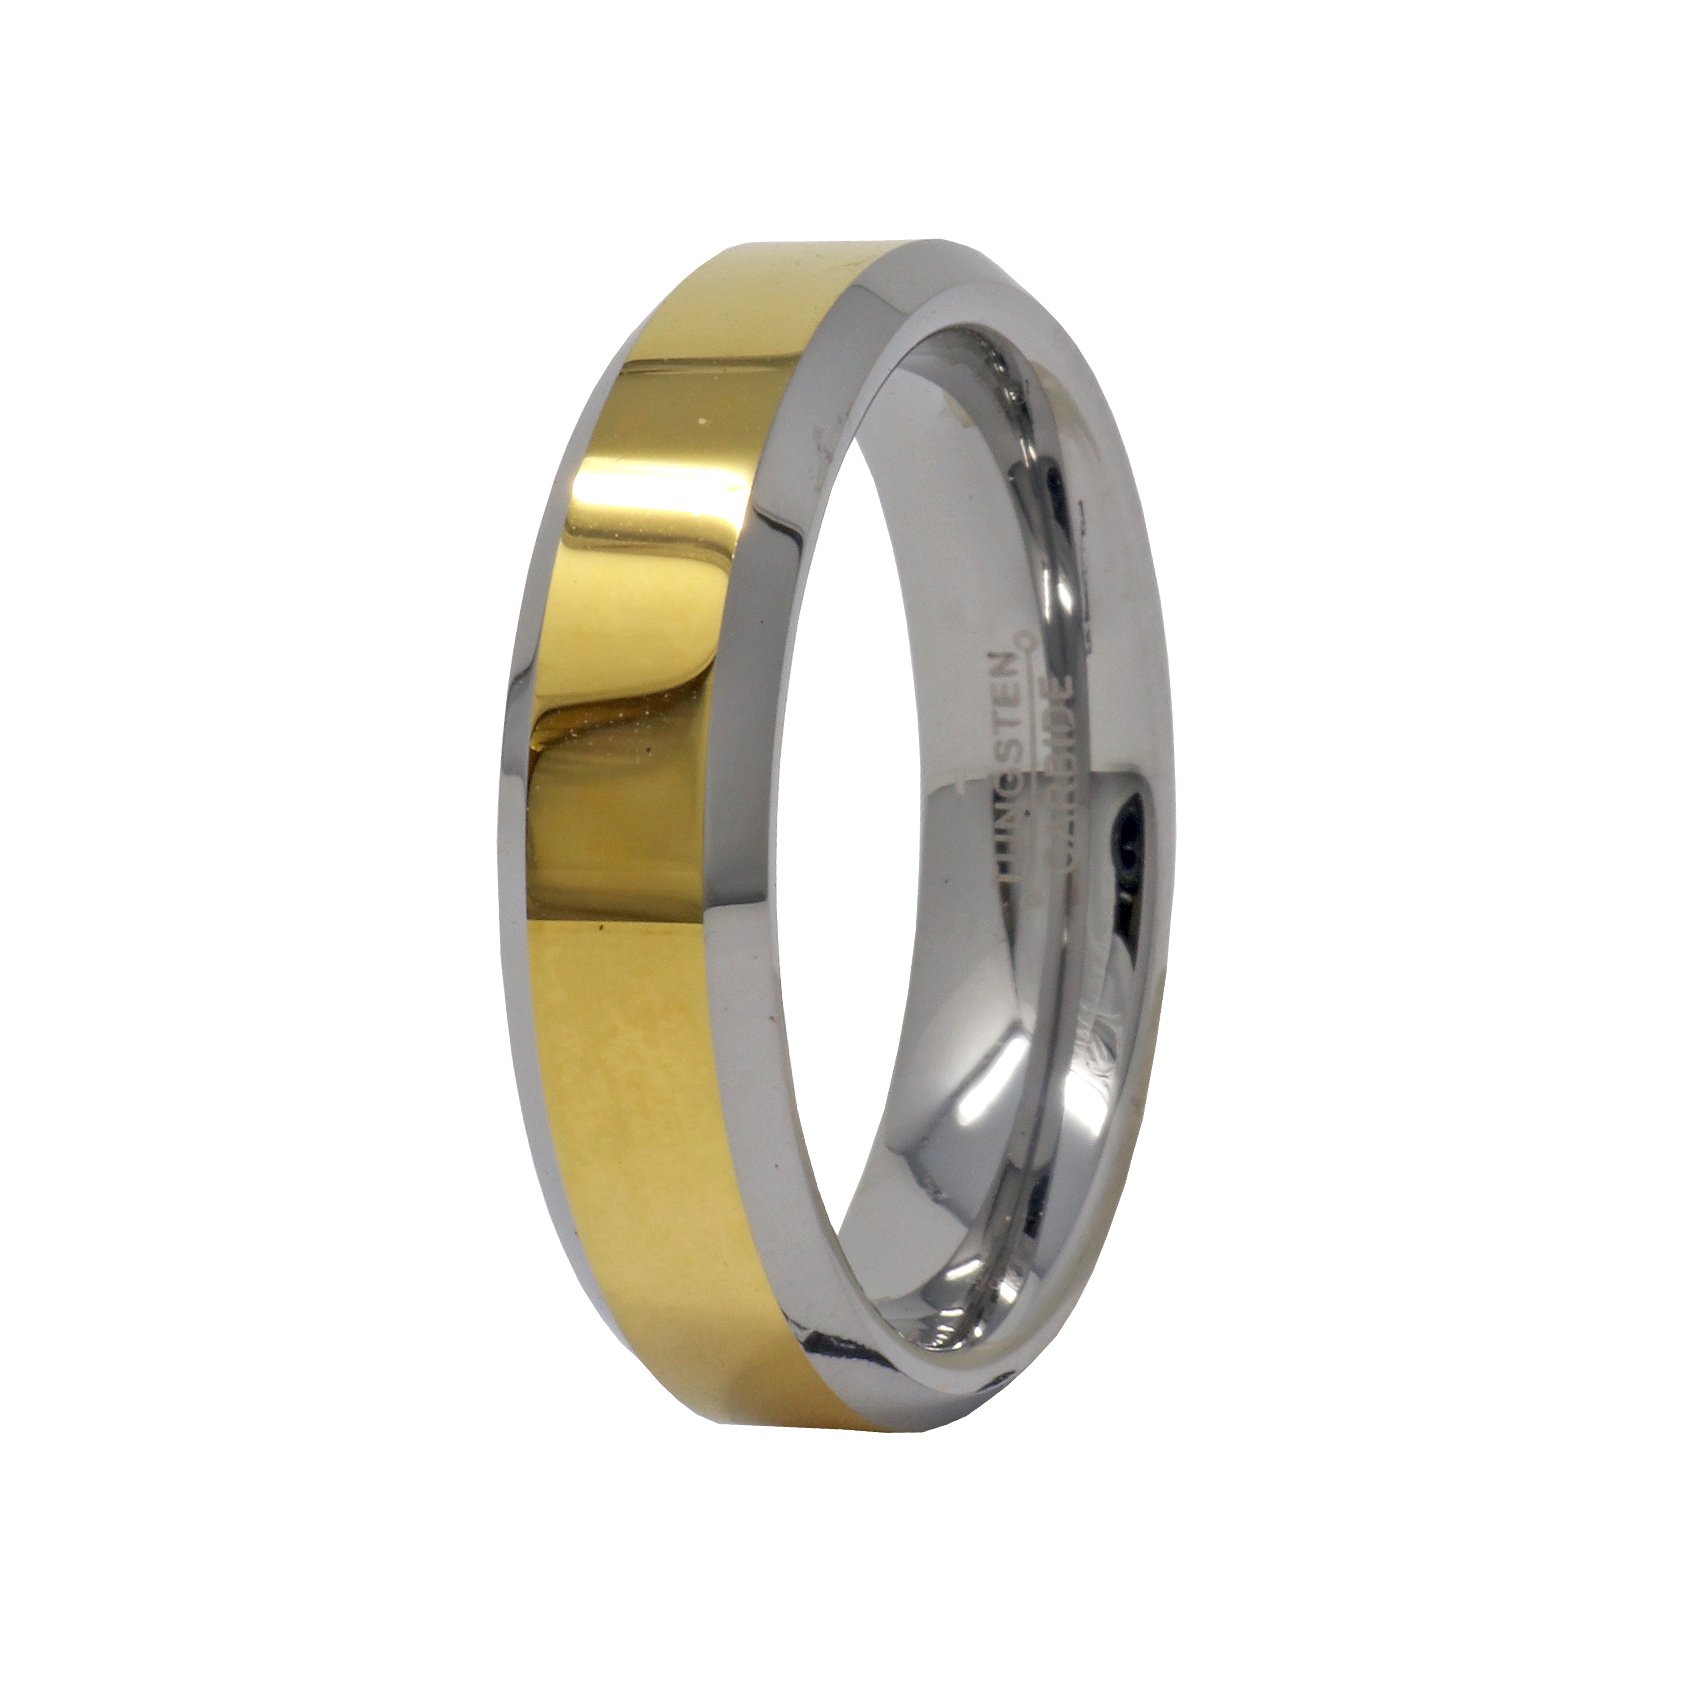 Tungsten Ring Size 6.5 - 6mm Gold Plated Center